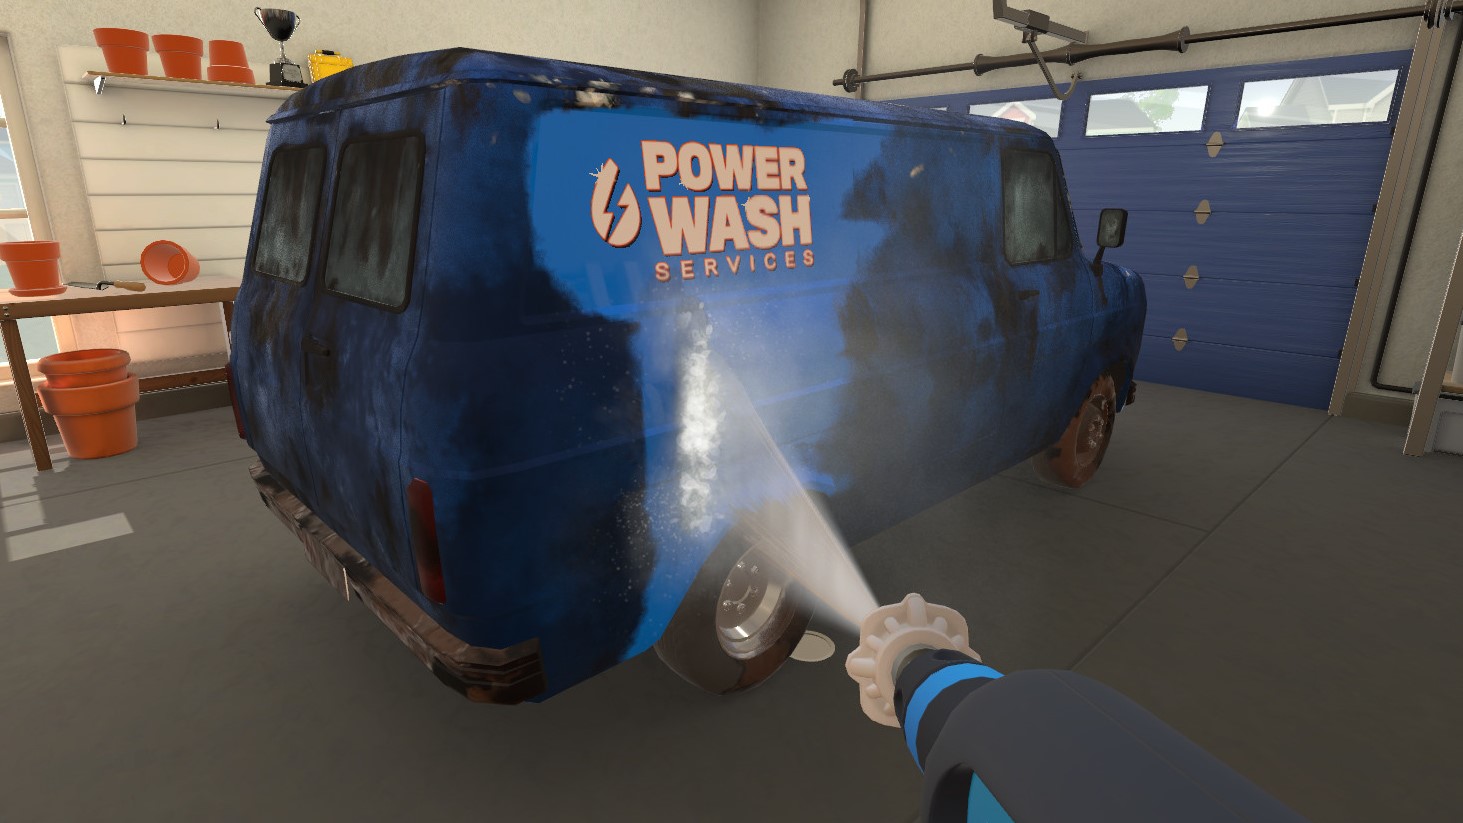 PowerWash Simulator's Back To The Future DLC is out now